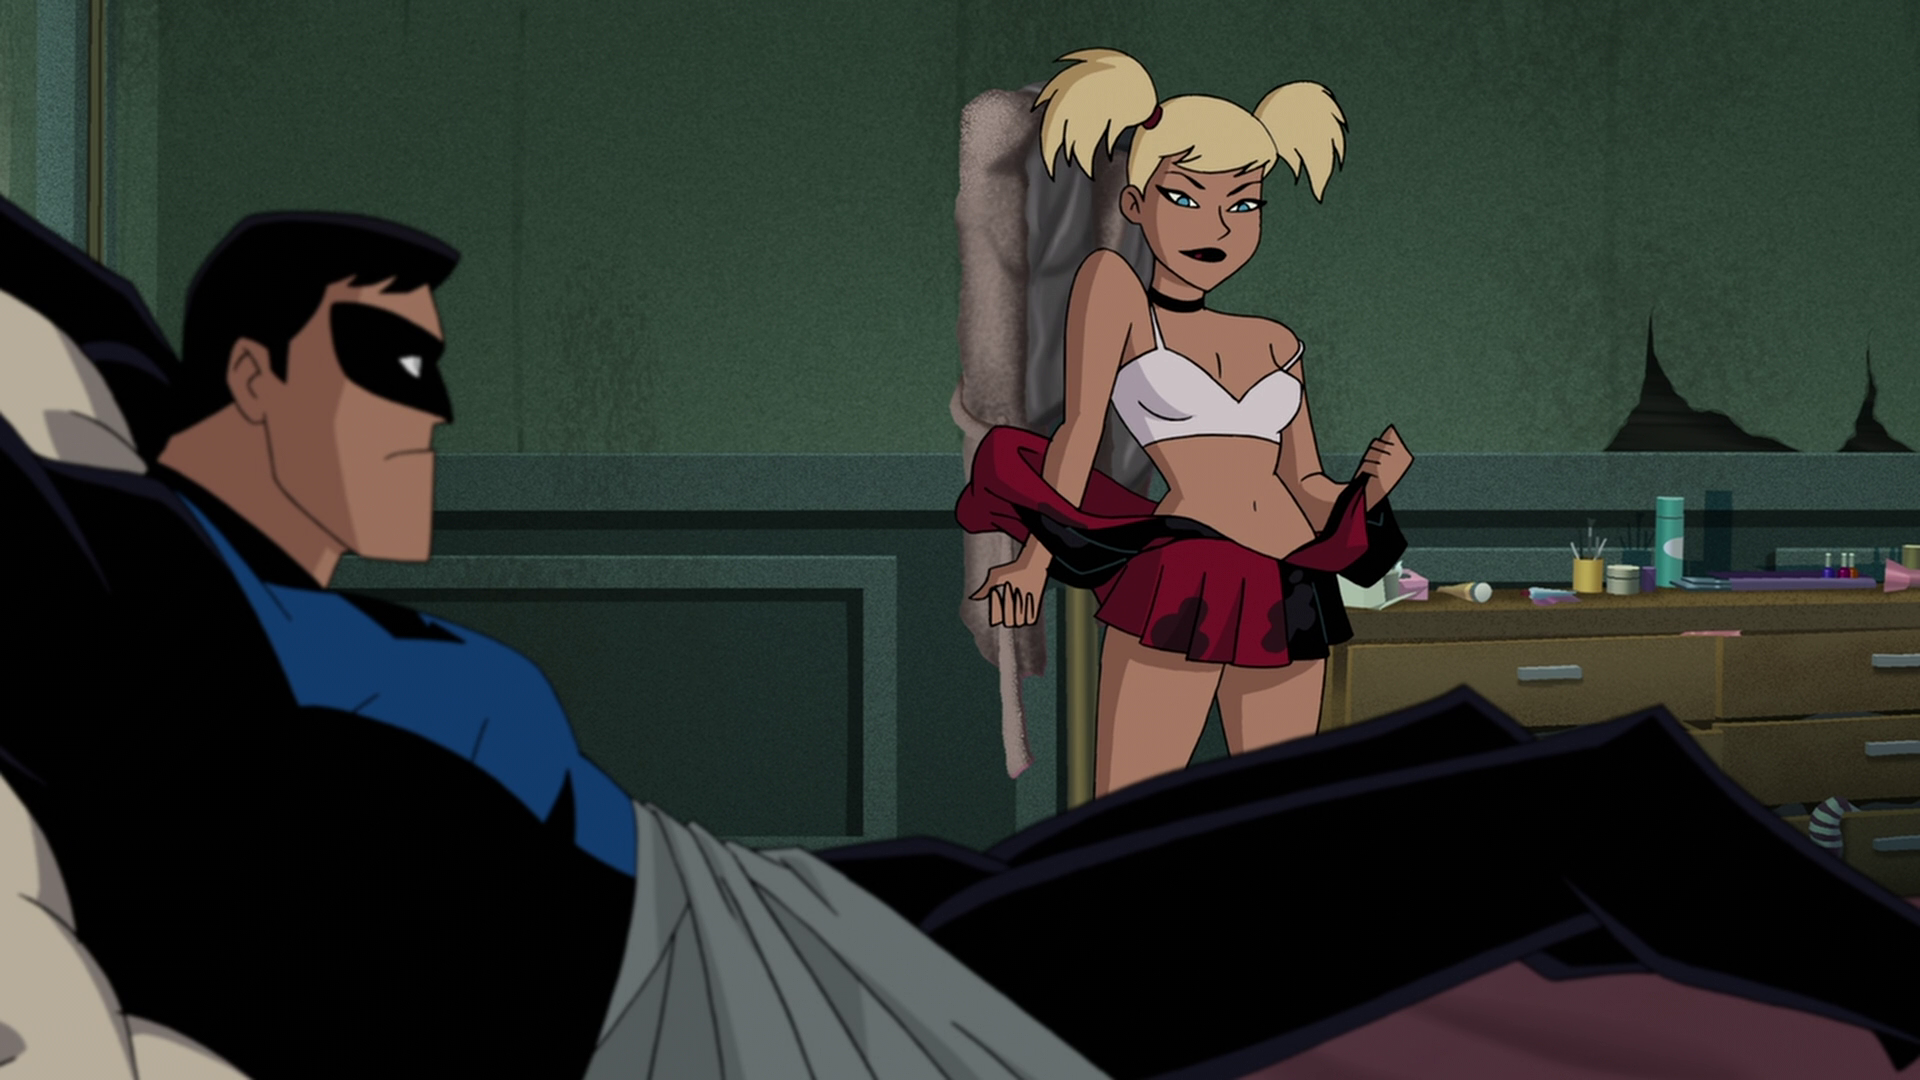 Continue below for an assortment of screengrabs from the Batman and Harley ...